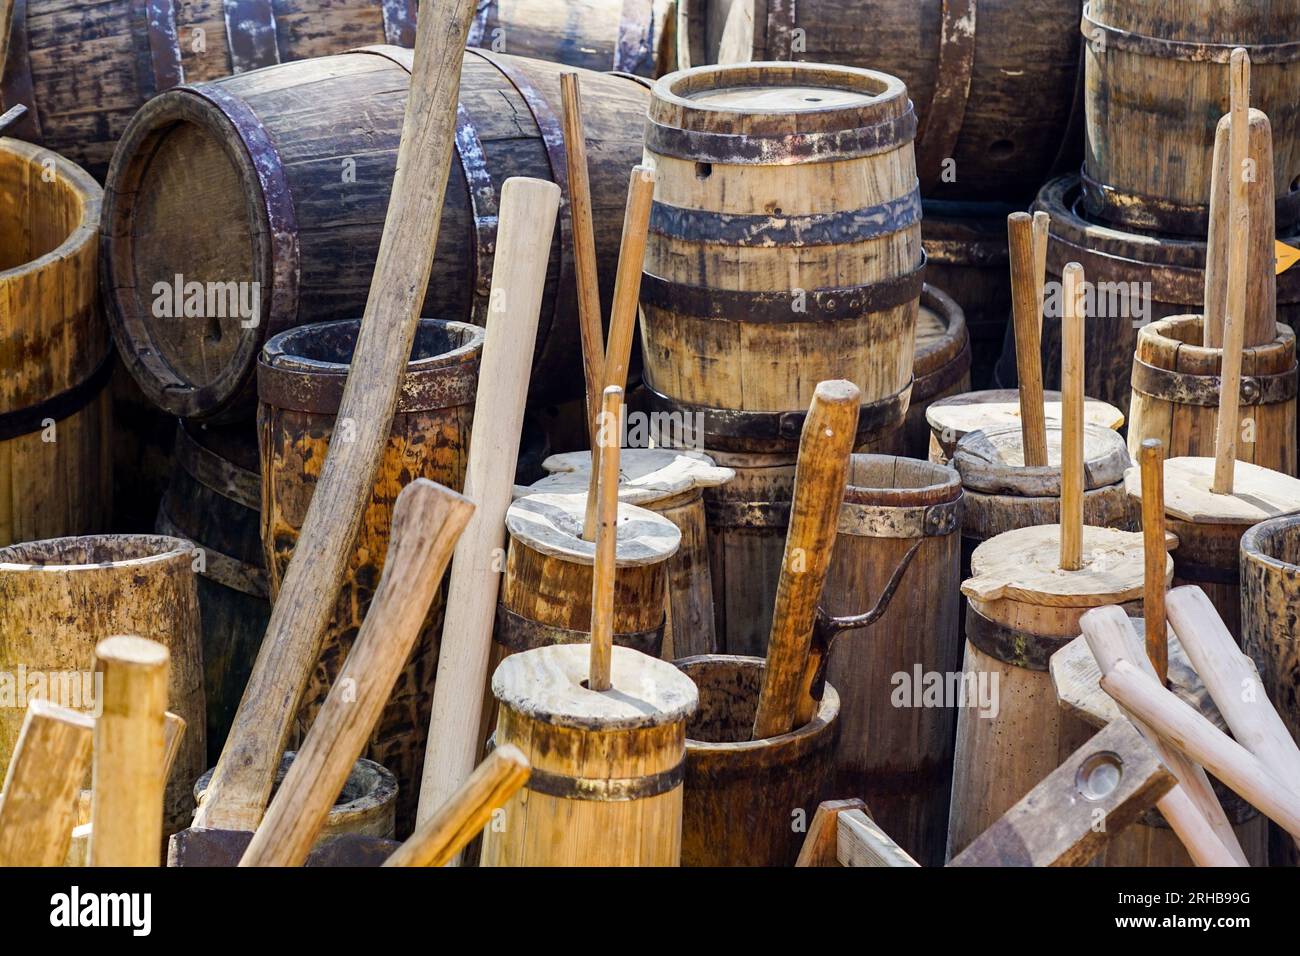 Authentic old wooden barrels of various sizes with metal hoops, butter churns, wooden utensils Stock Photo